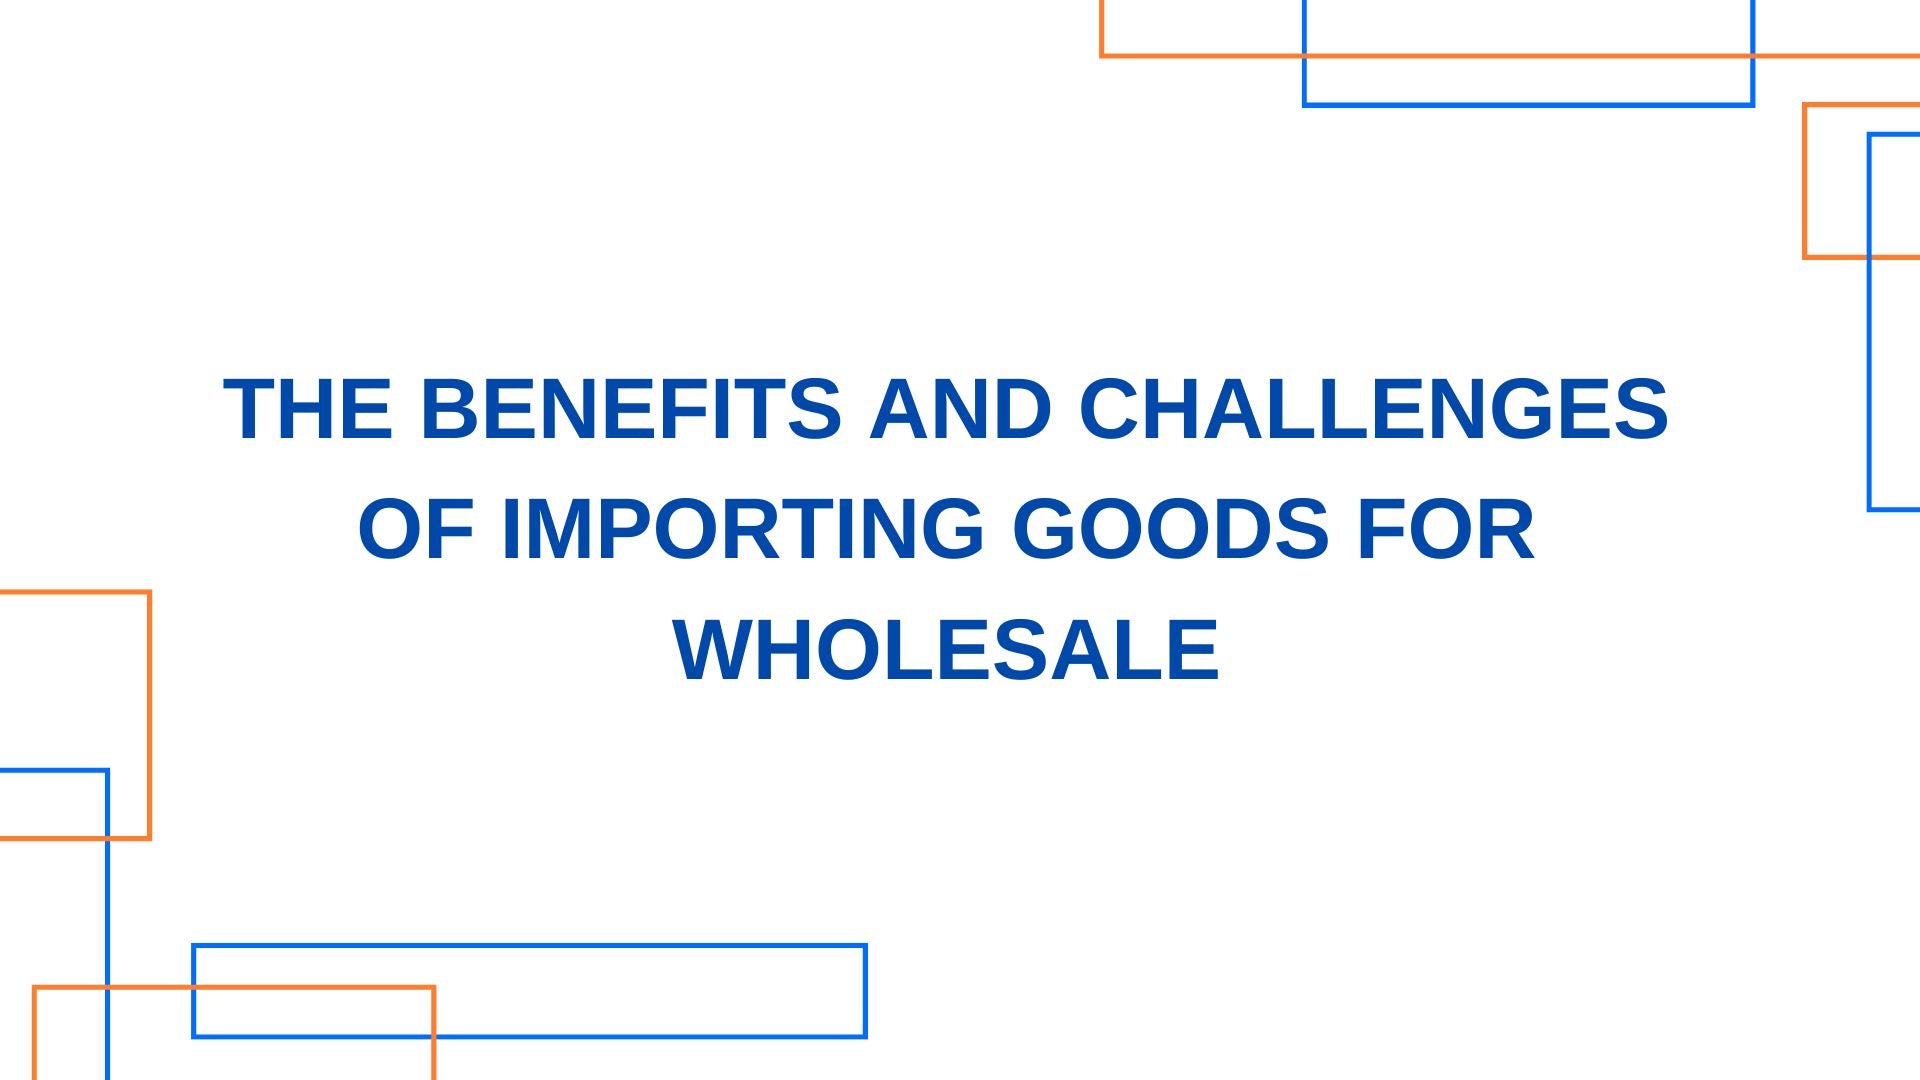 The Benefits and Challenges of Importing Goods for Wholesale